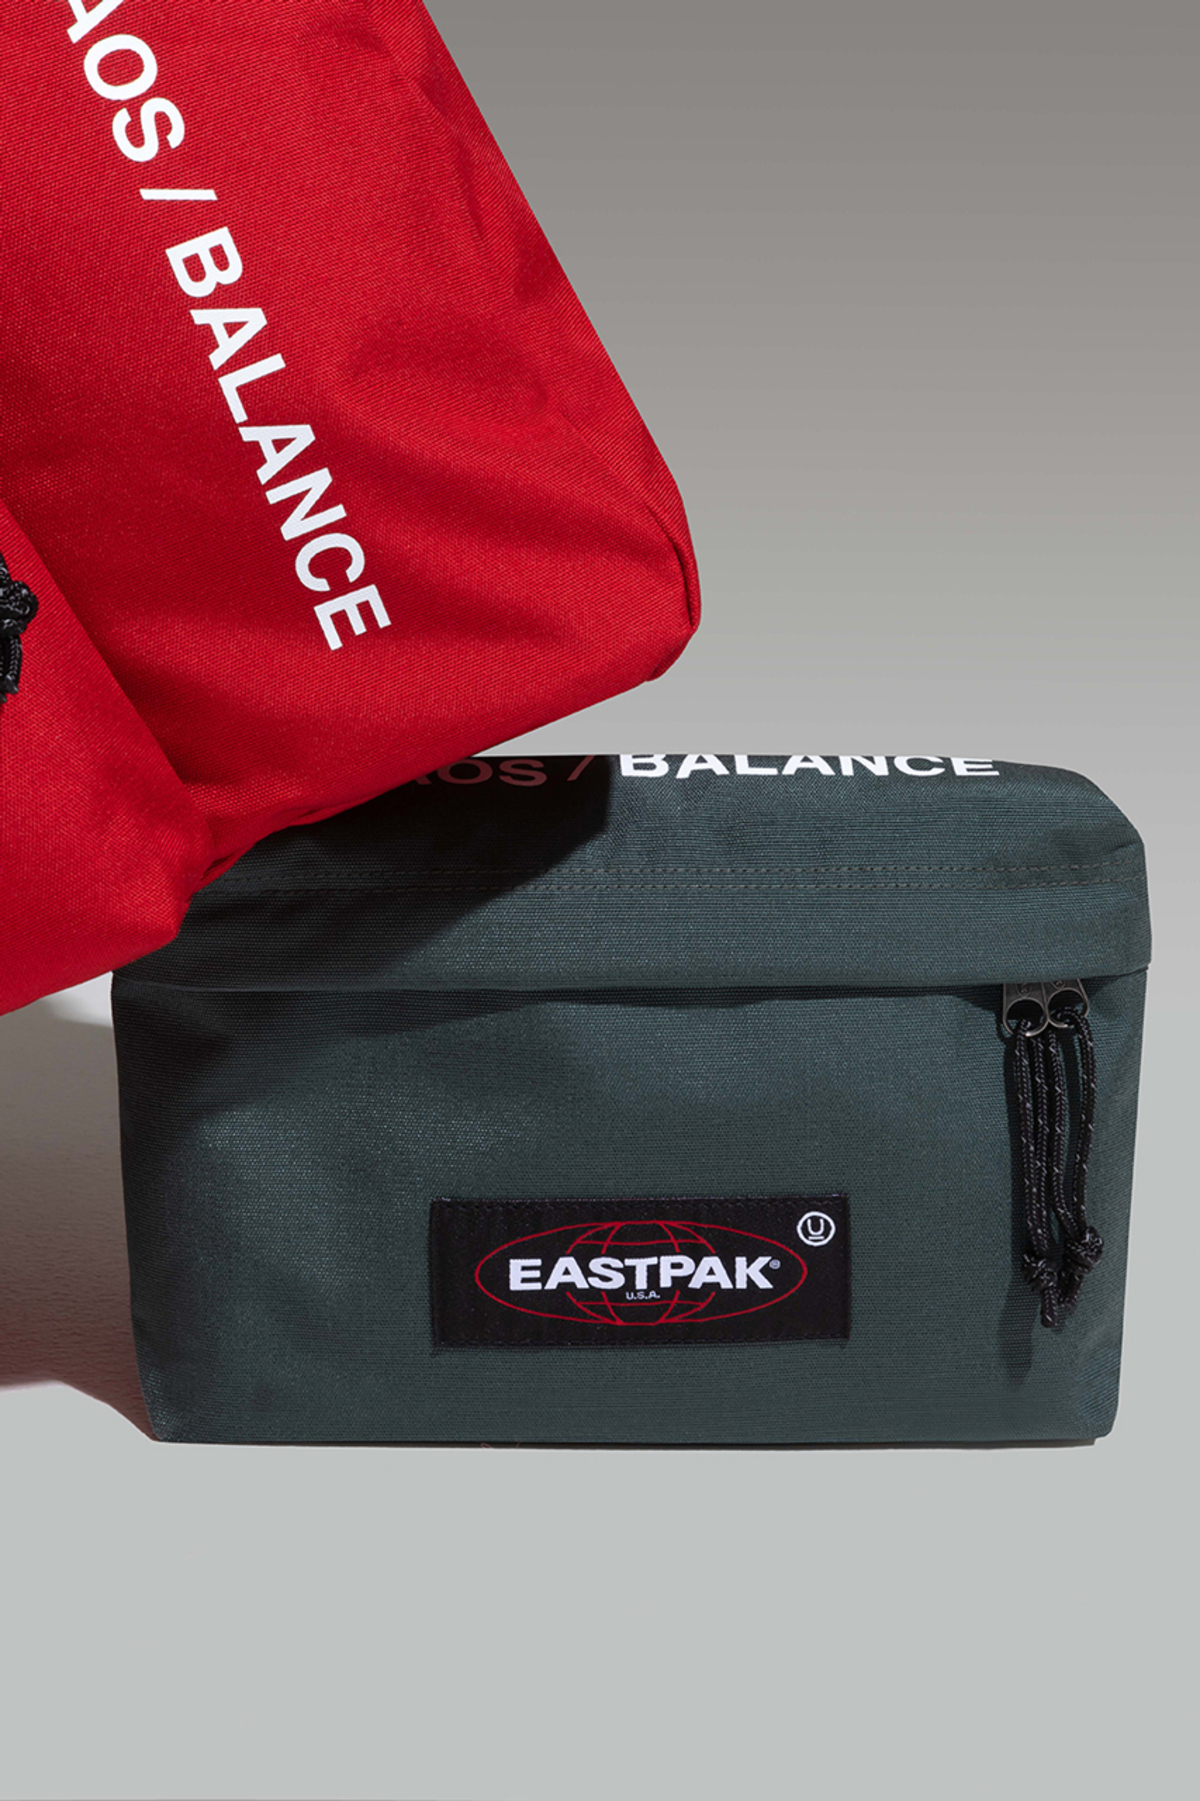 Eastpak & UNDERCOVER Join Forces Again for Bag Collection – PAUSE 